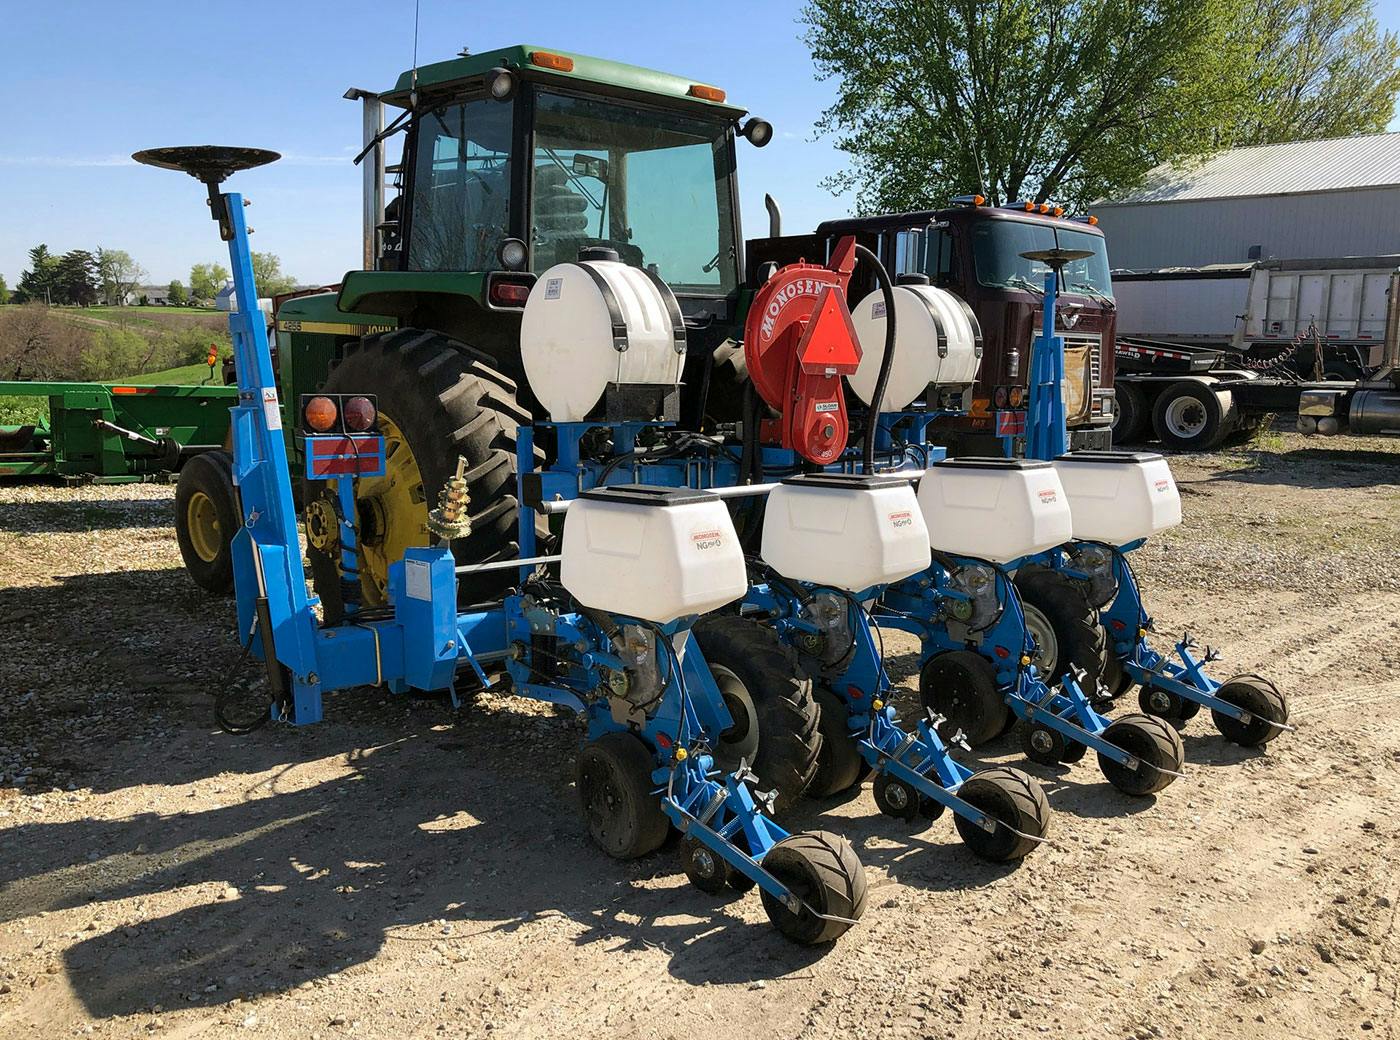 American Hemp Research planter with plates for field trial plots as well as production